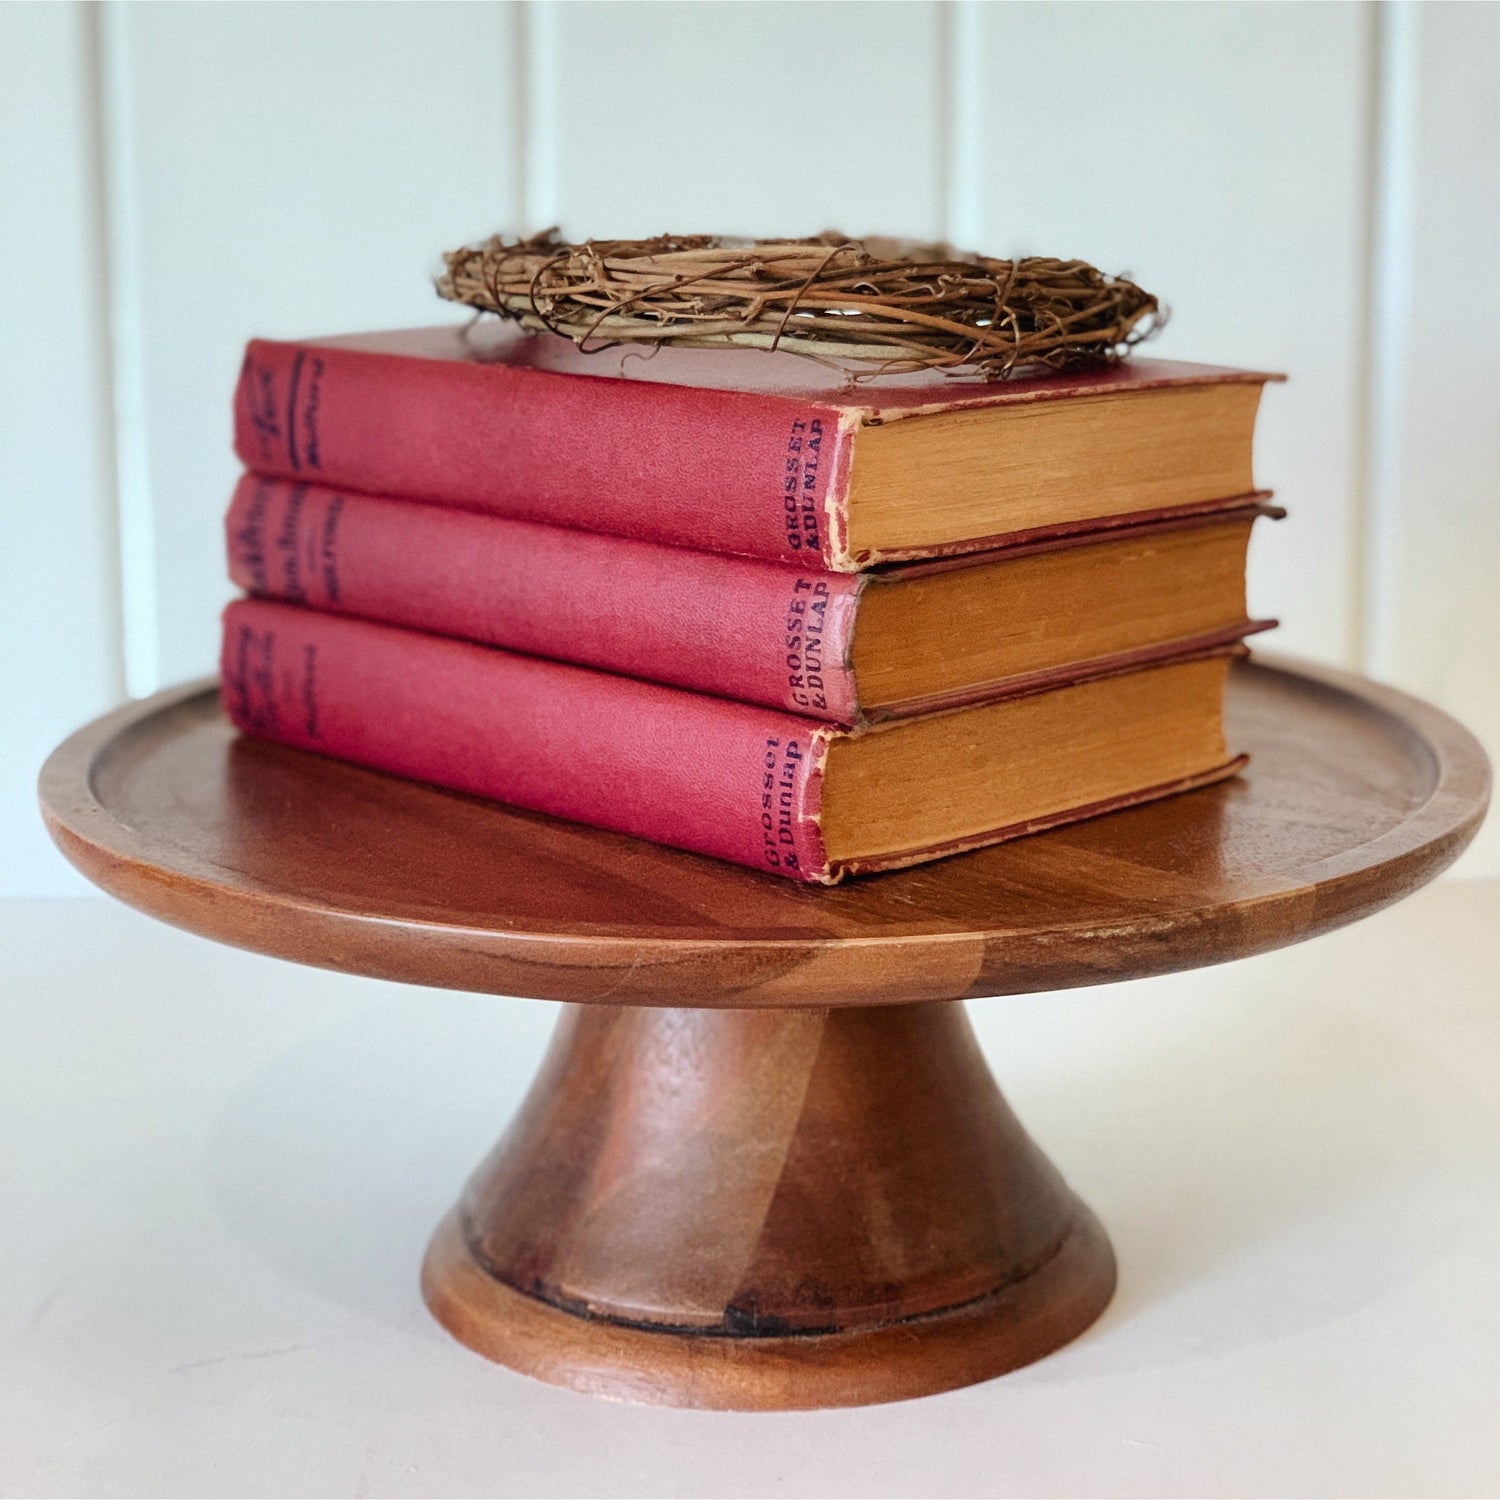 Clarence E. Mulford Book Set, Antique Old West Novels, Maroon Red Books for Shelf Styling